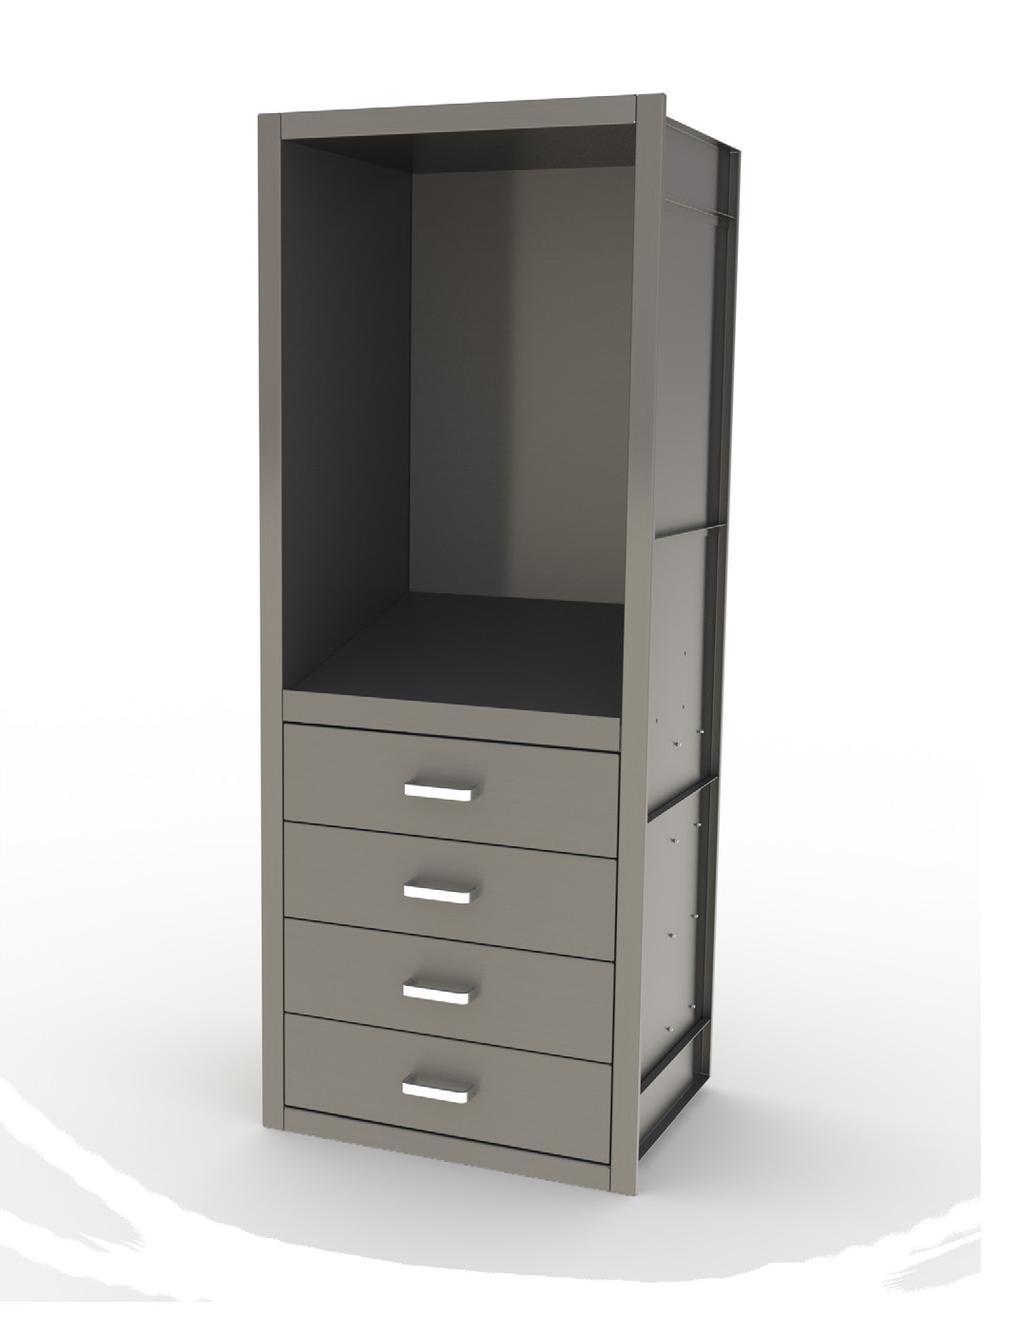 Desk Cabinets Base Cabinets Free standing Fully welded construction Standard handles Fully welded construction Full CAD renderings Engineered room layouts in CAD based on customer provided drawing